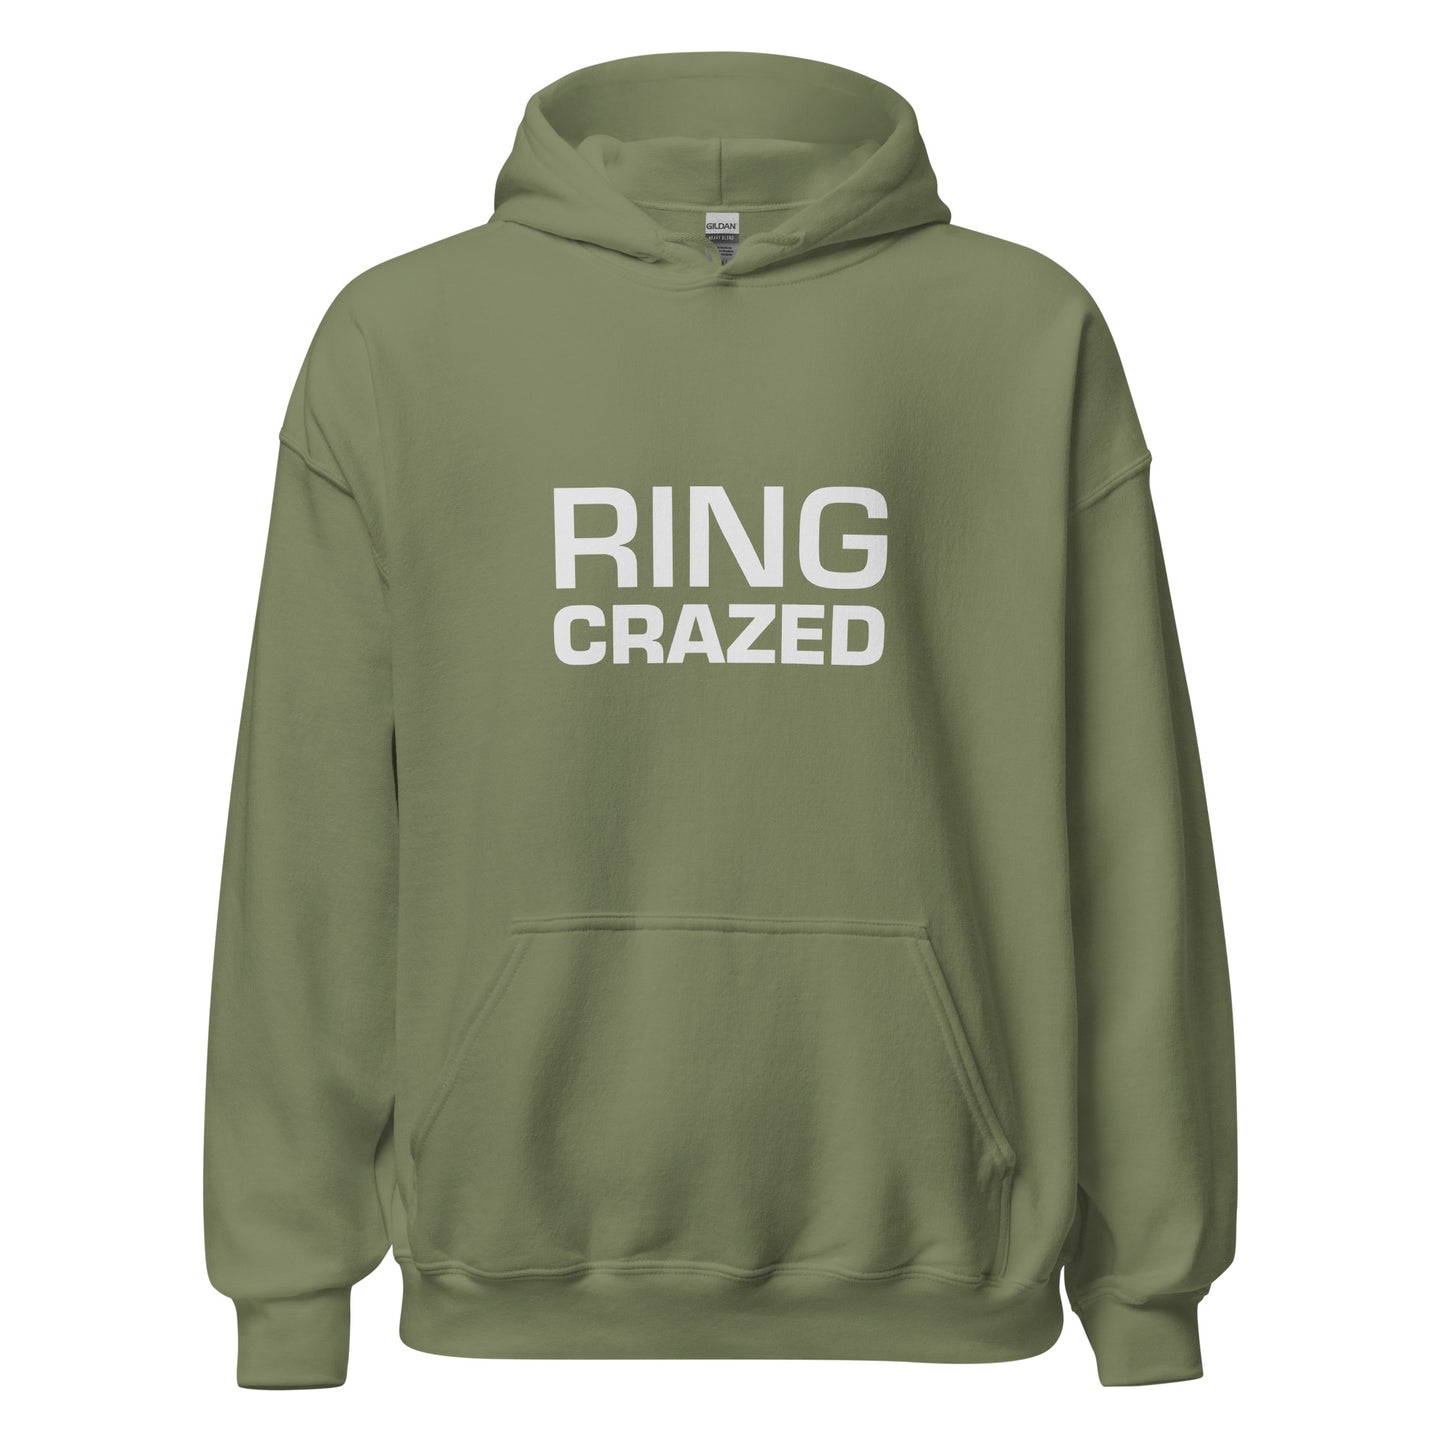 Ring Crazed wrestling and boxing hoodies are for boxers, wrestlers, and fans who go crazy for the sports and can't get enough of the action.